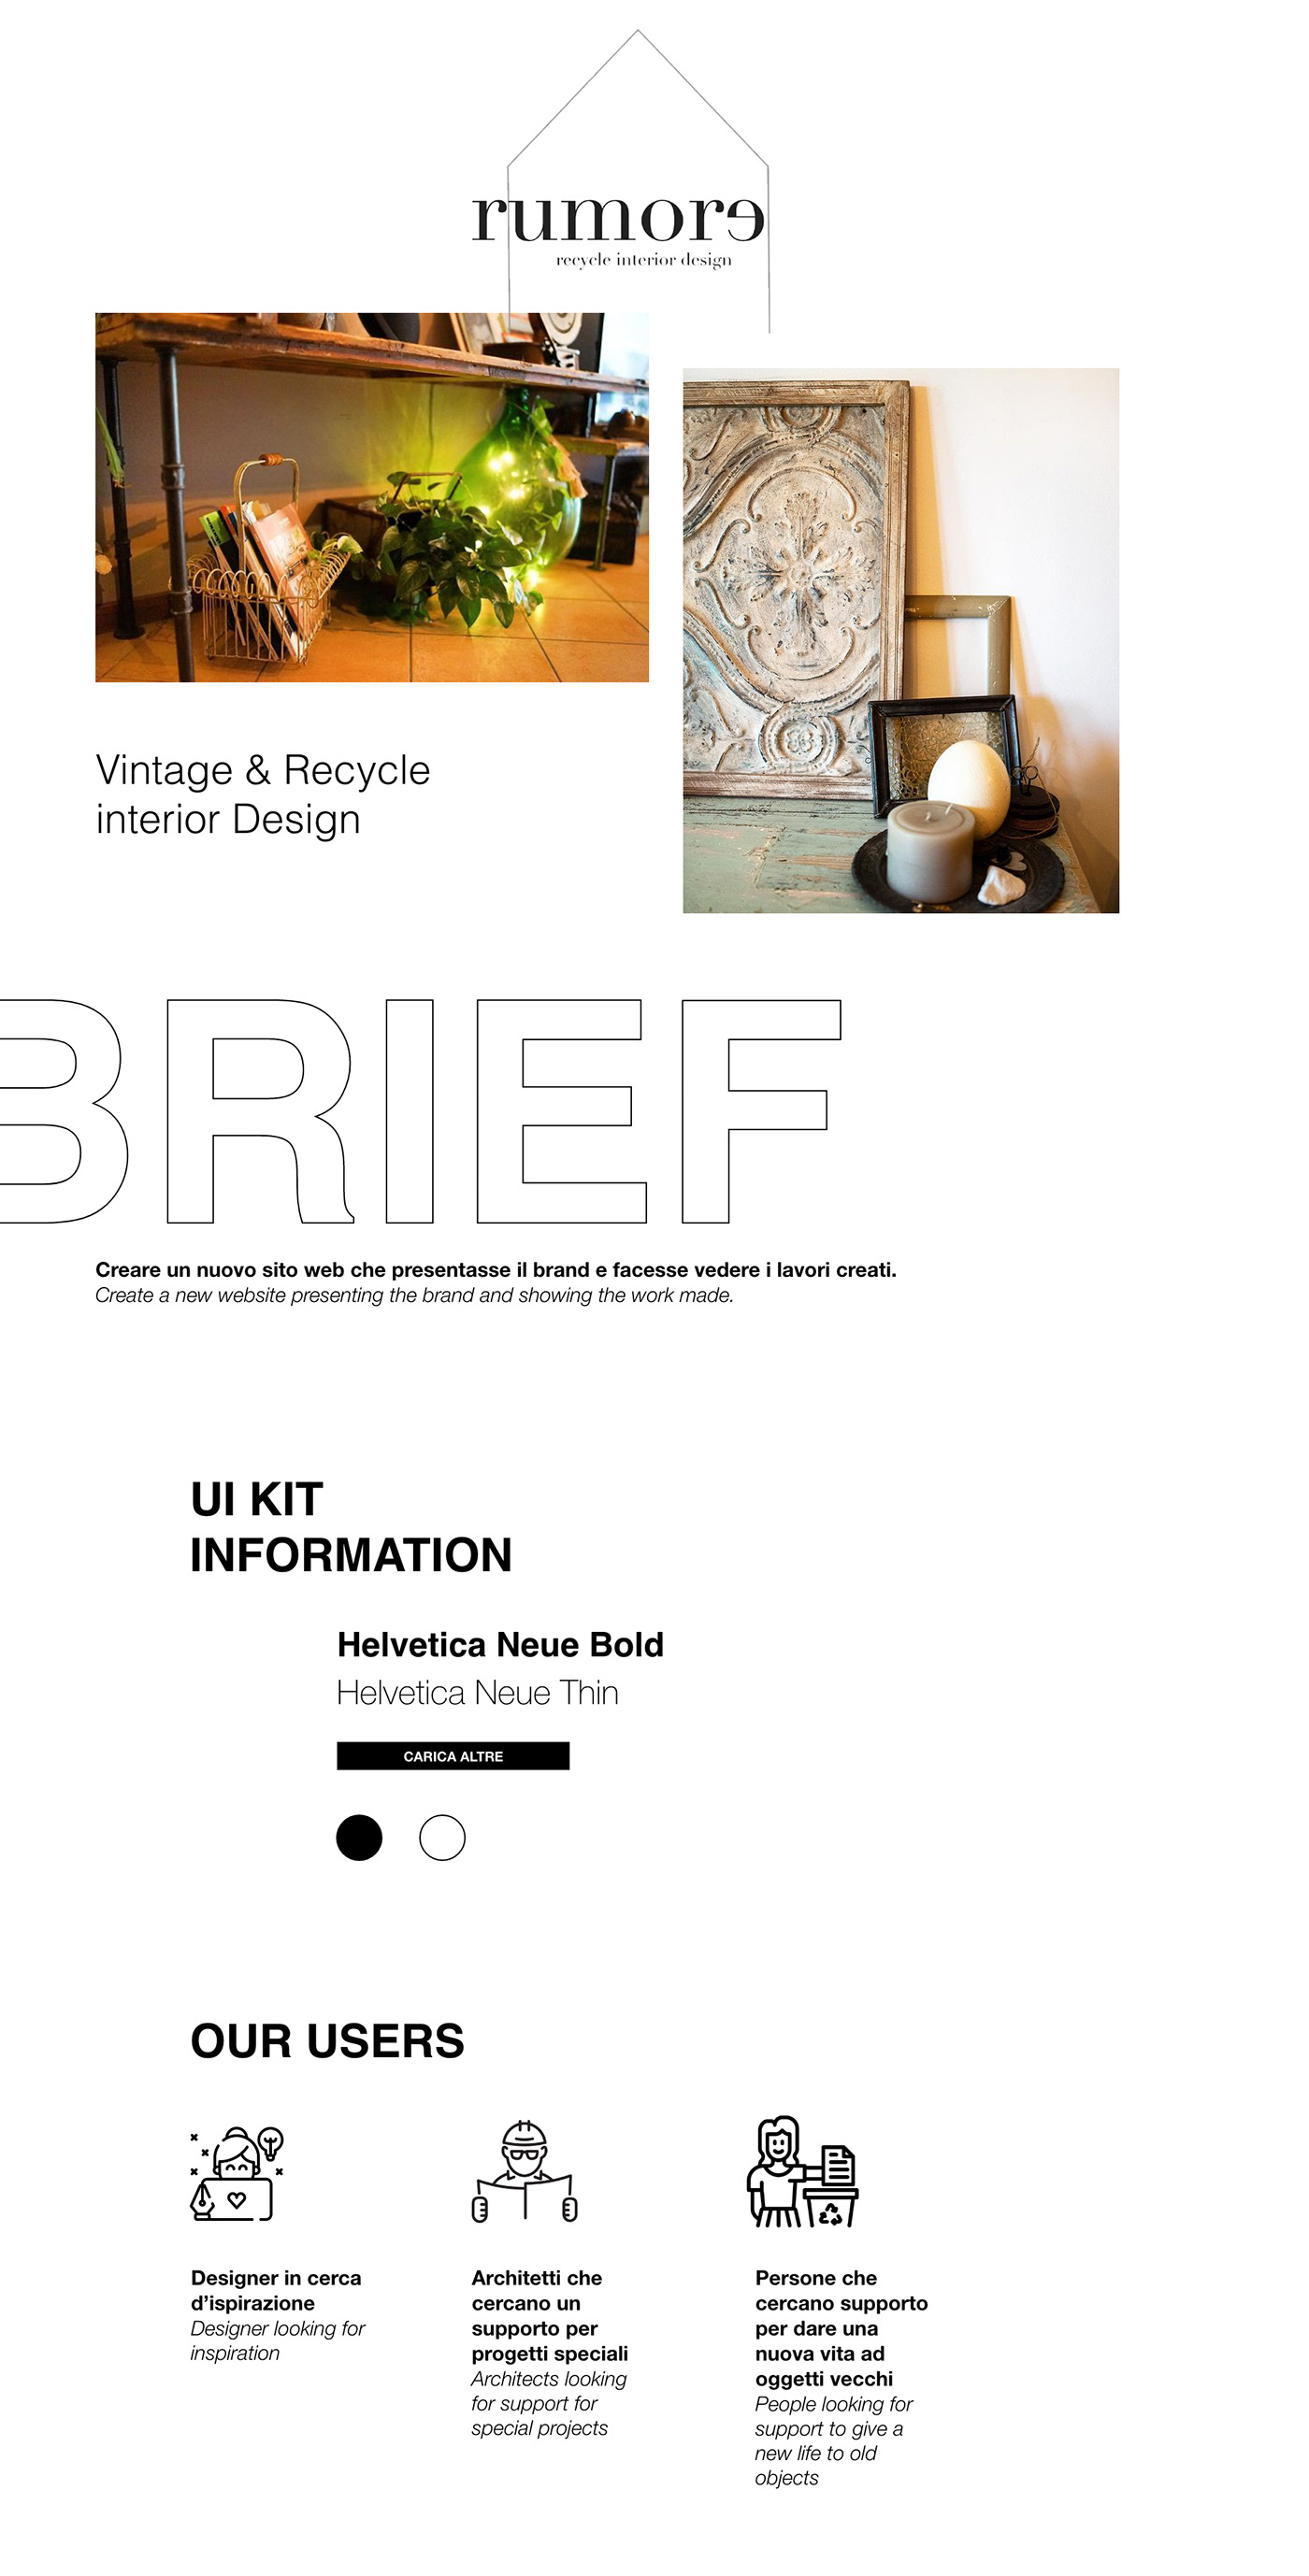 Rumore a new concept design studio, brief, user experience, and user journey